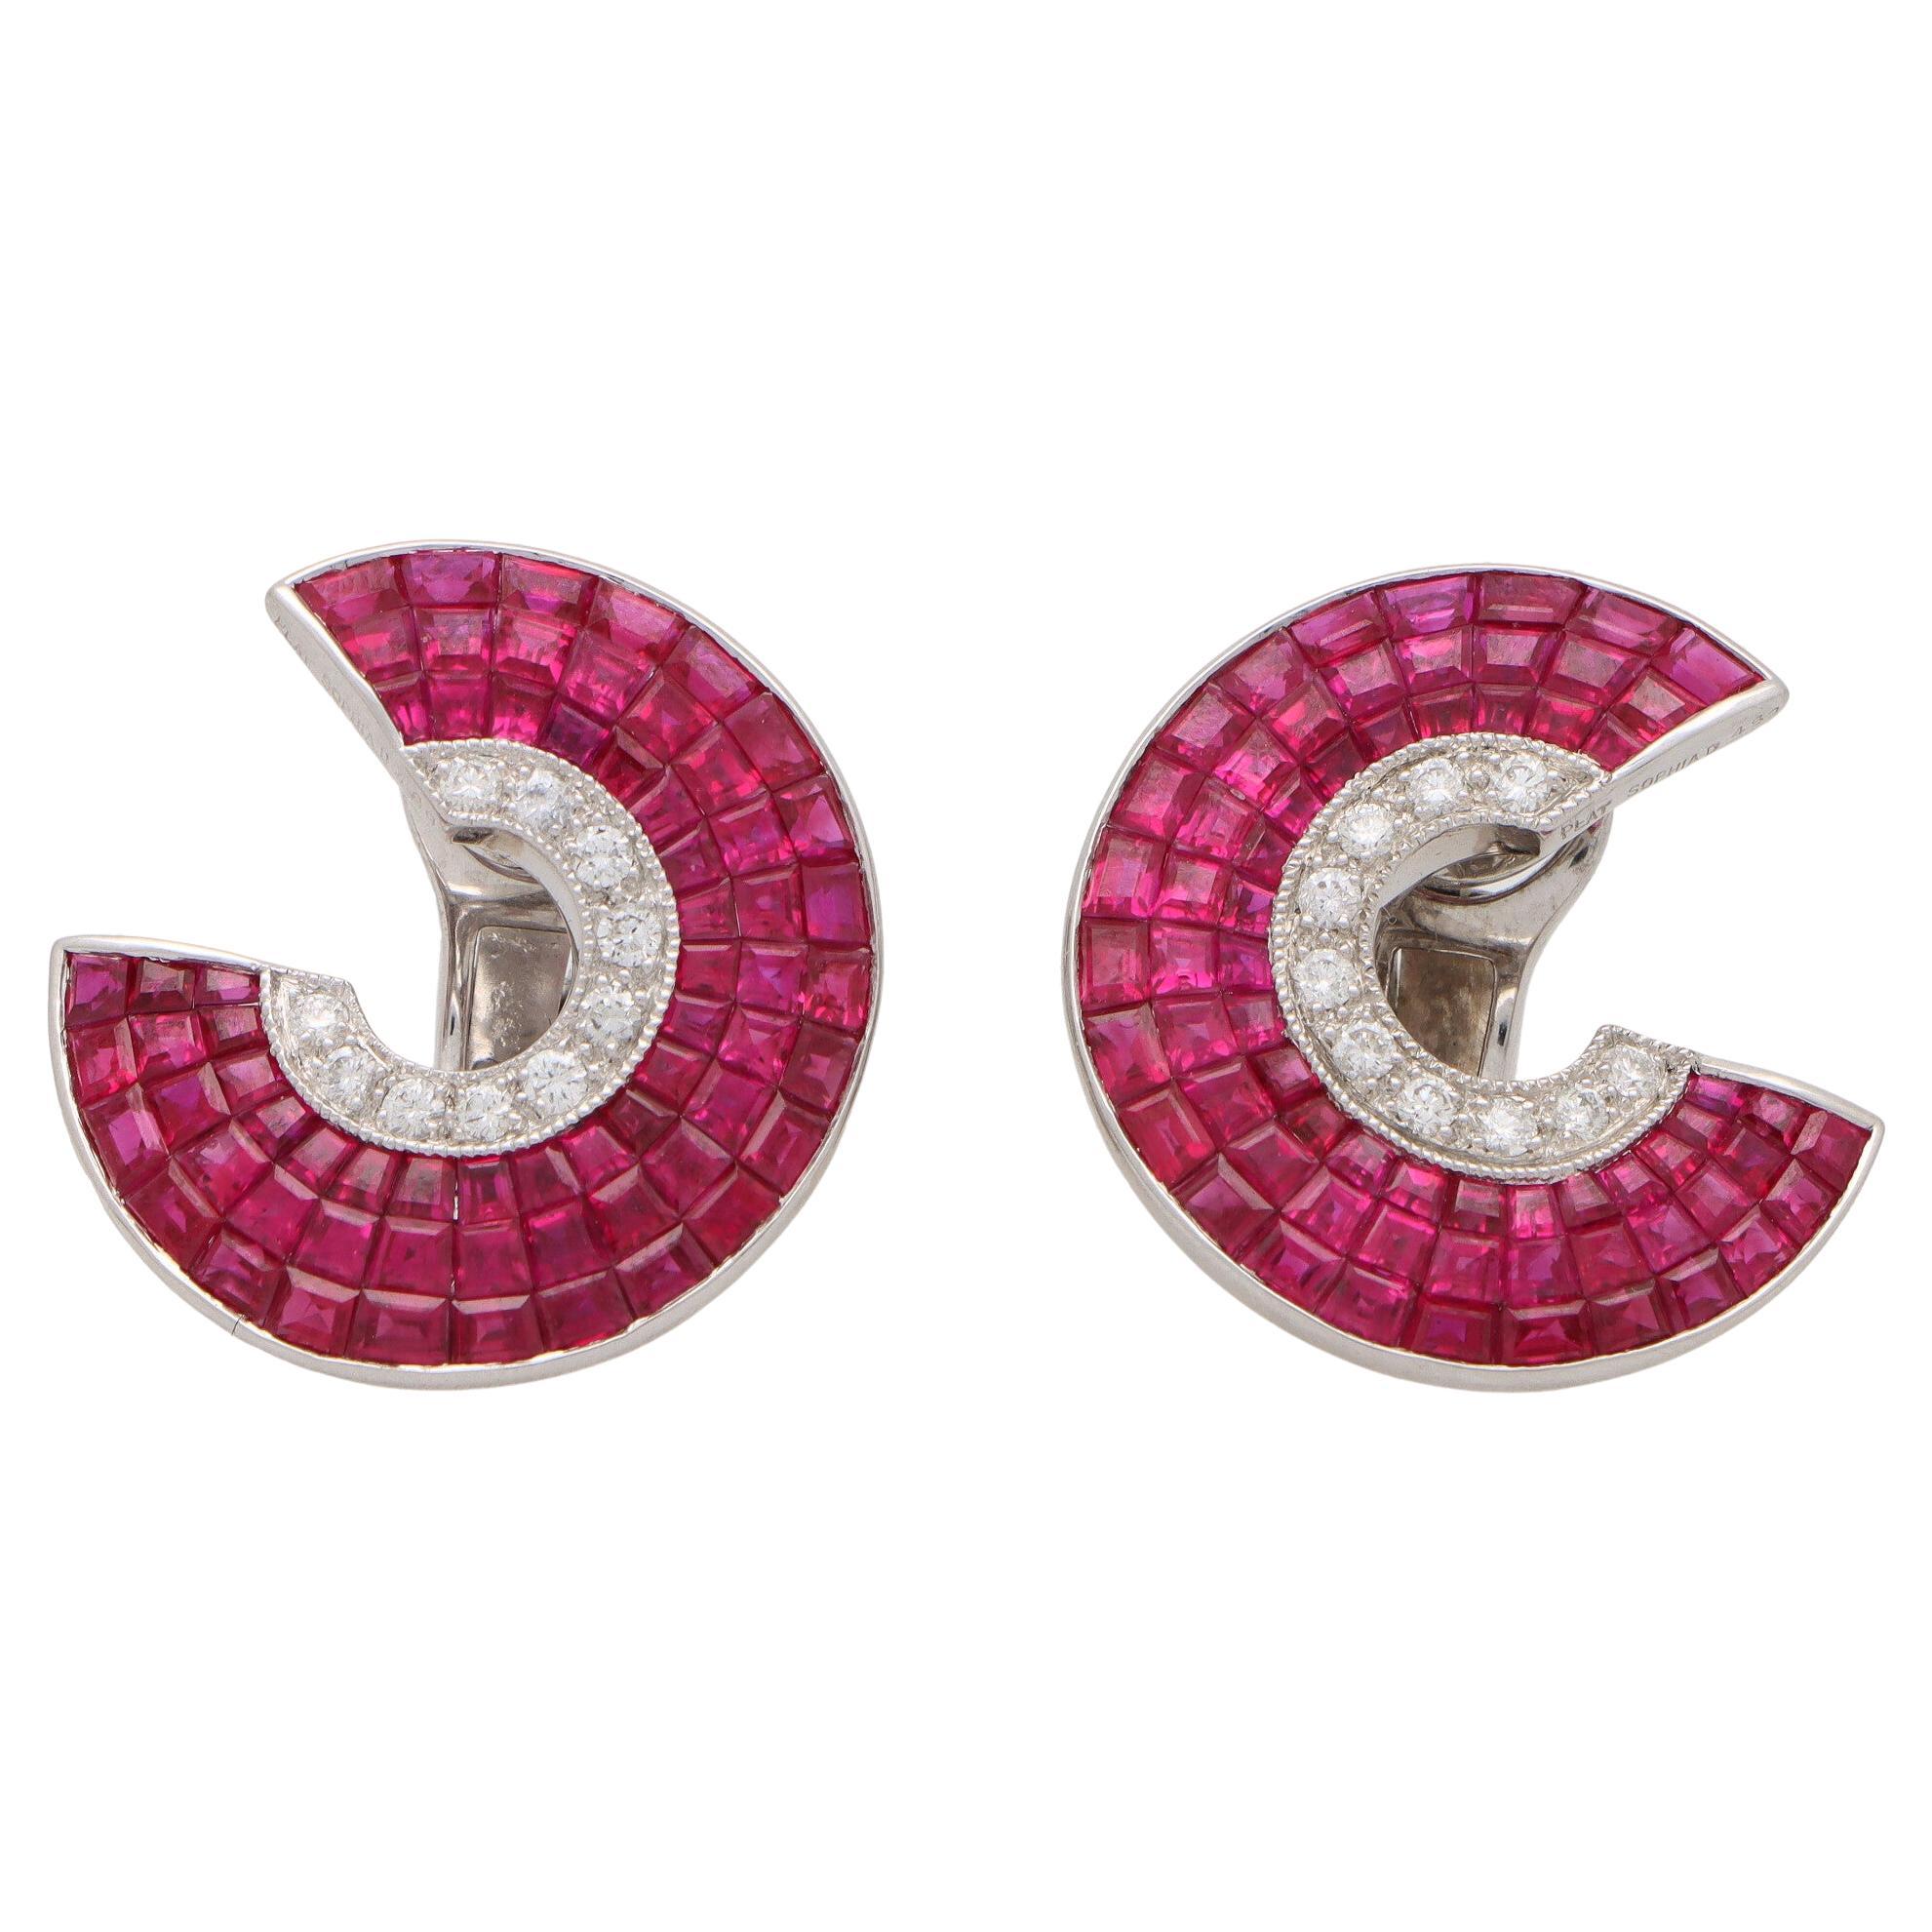 Art Deco Style Invisibly Set Ruby and Diamond Earrings Set in Platinum